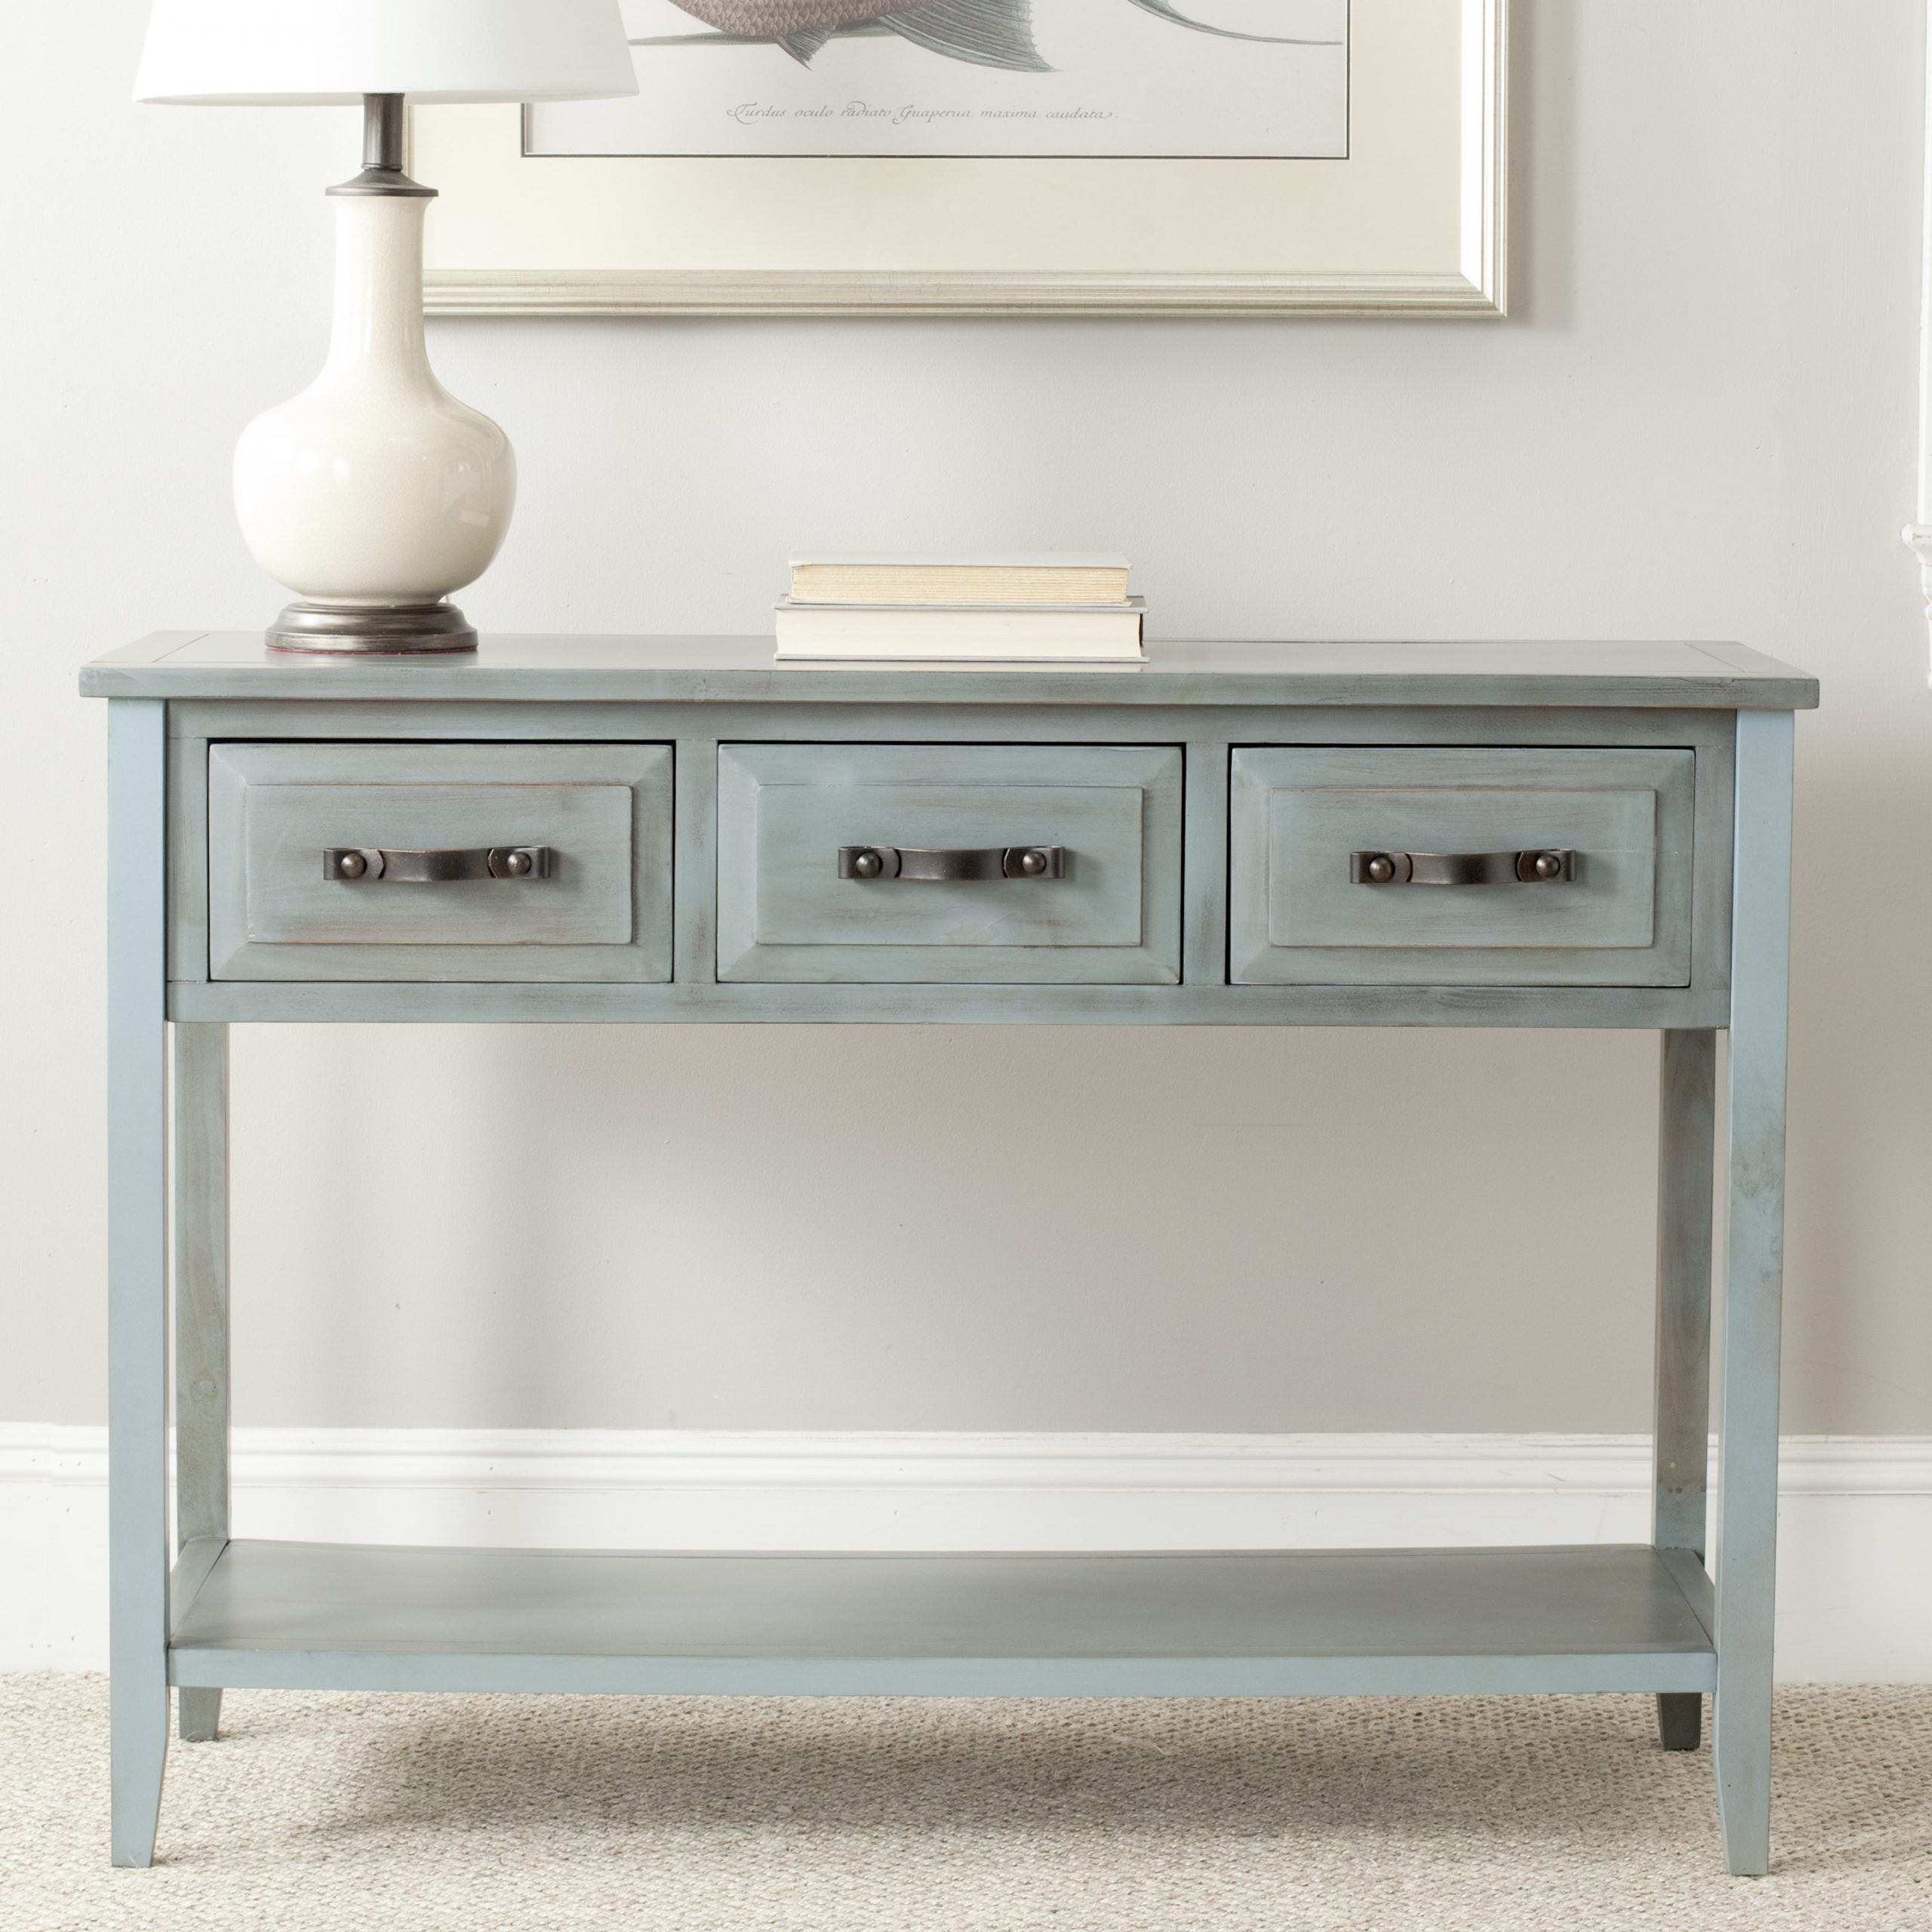 Safavieh Aiden Contemporary Rustic Console Table W/ 3 Drawers – Walmart Pertaining To Modern Console Tables (View 15 of 20)